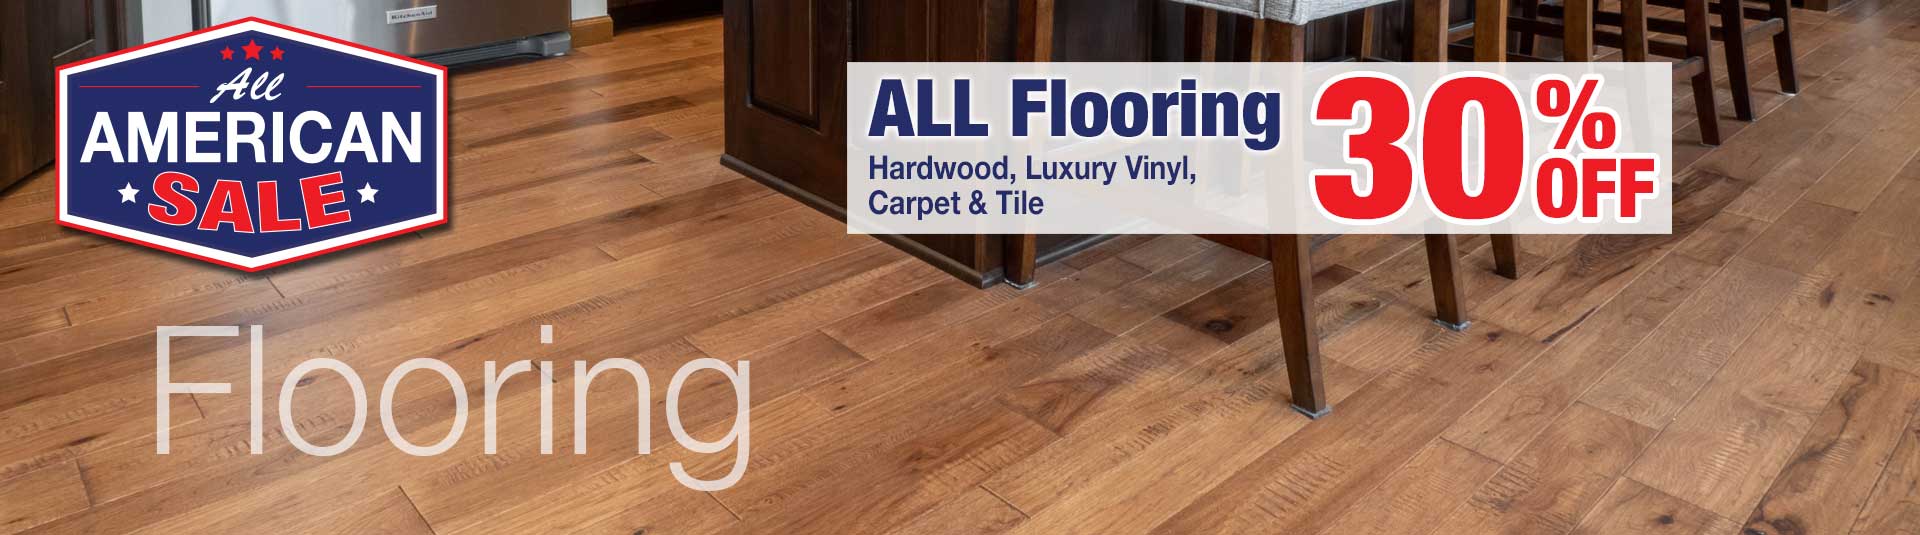 30% Off ALL Flooring during the All-American Sale at Benson Stone Company!